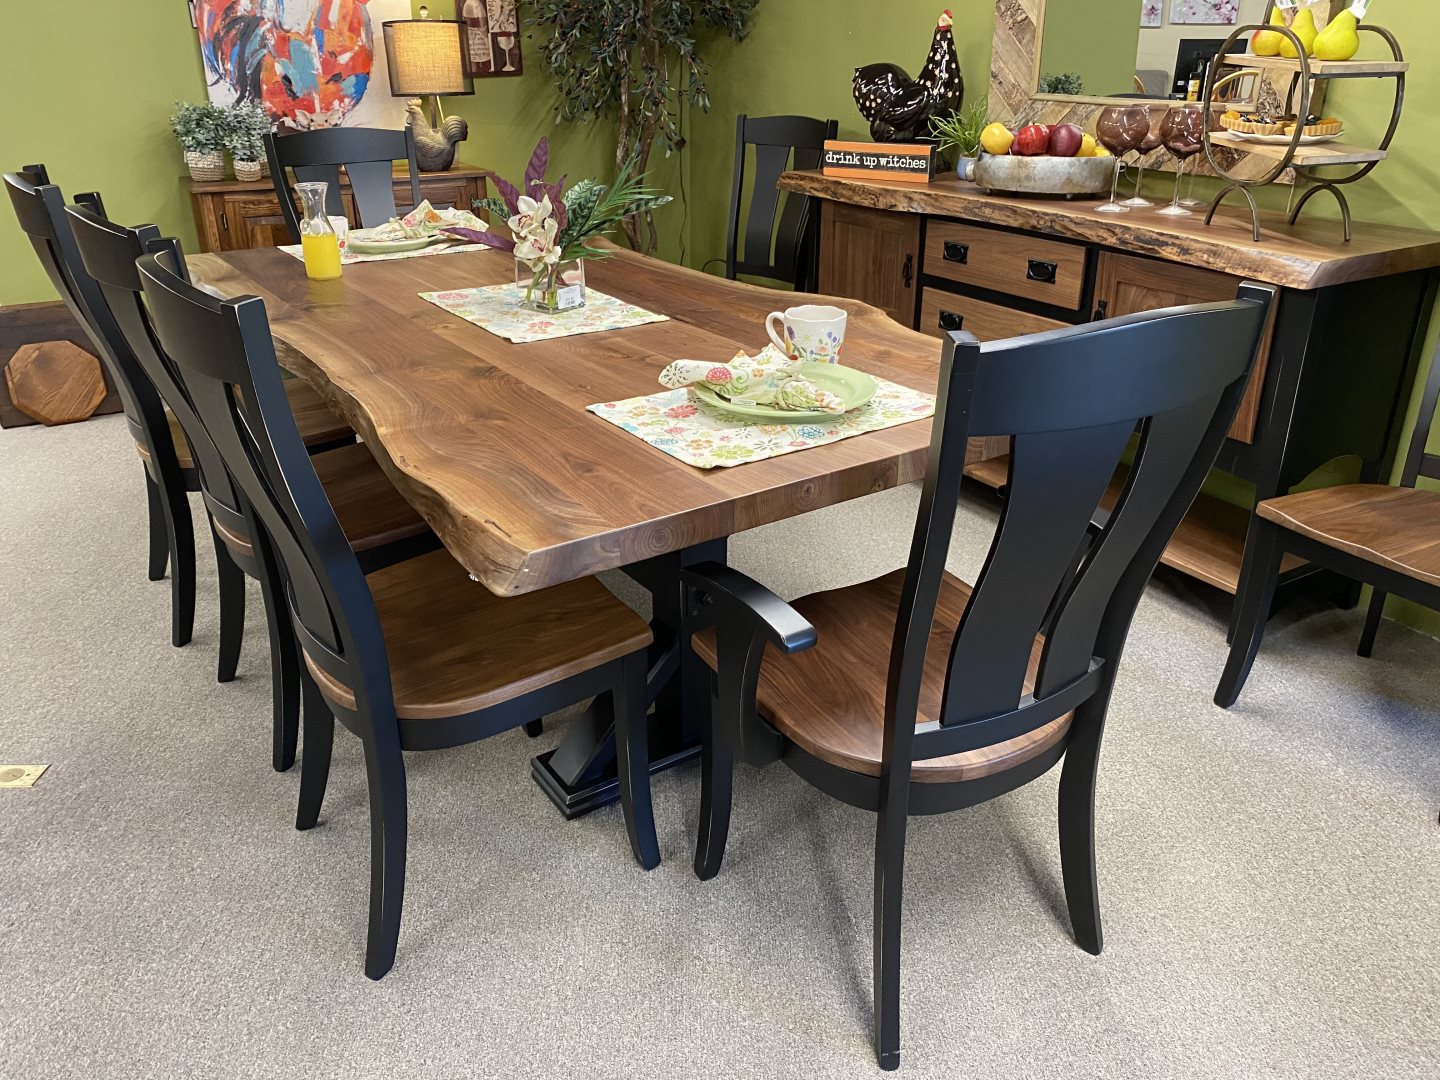 Live Edge Amish Table & Chairs - C40 & W21